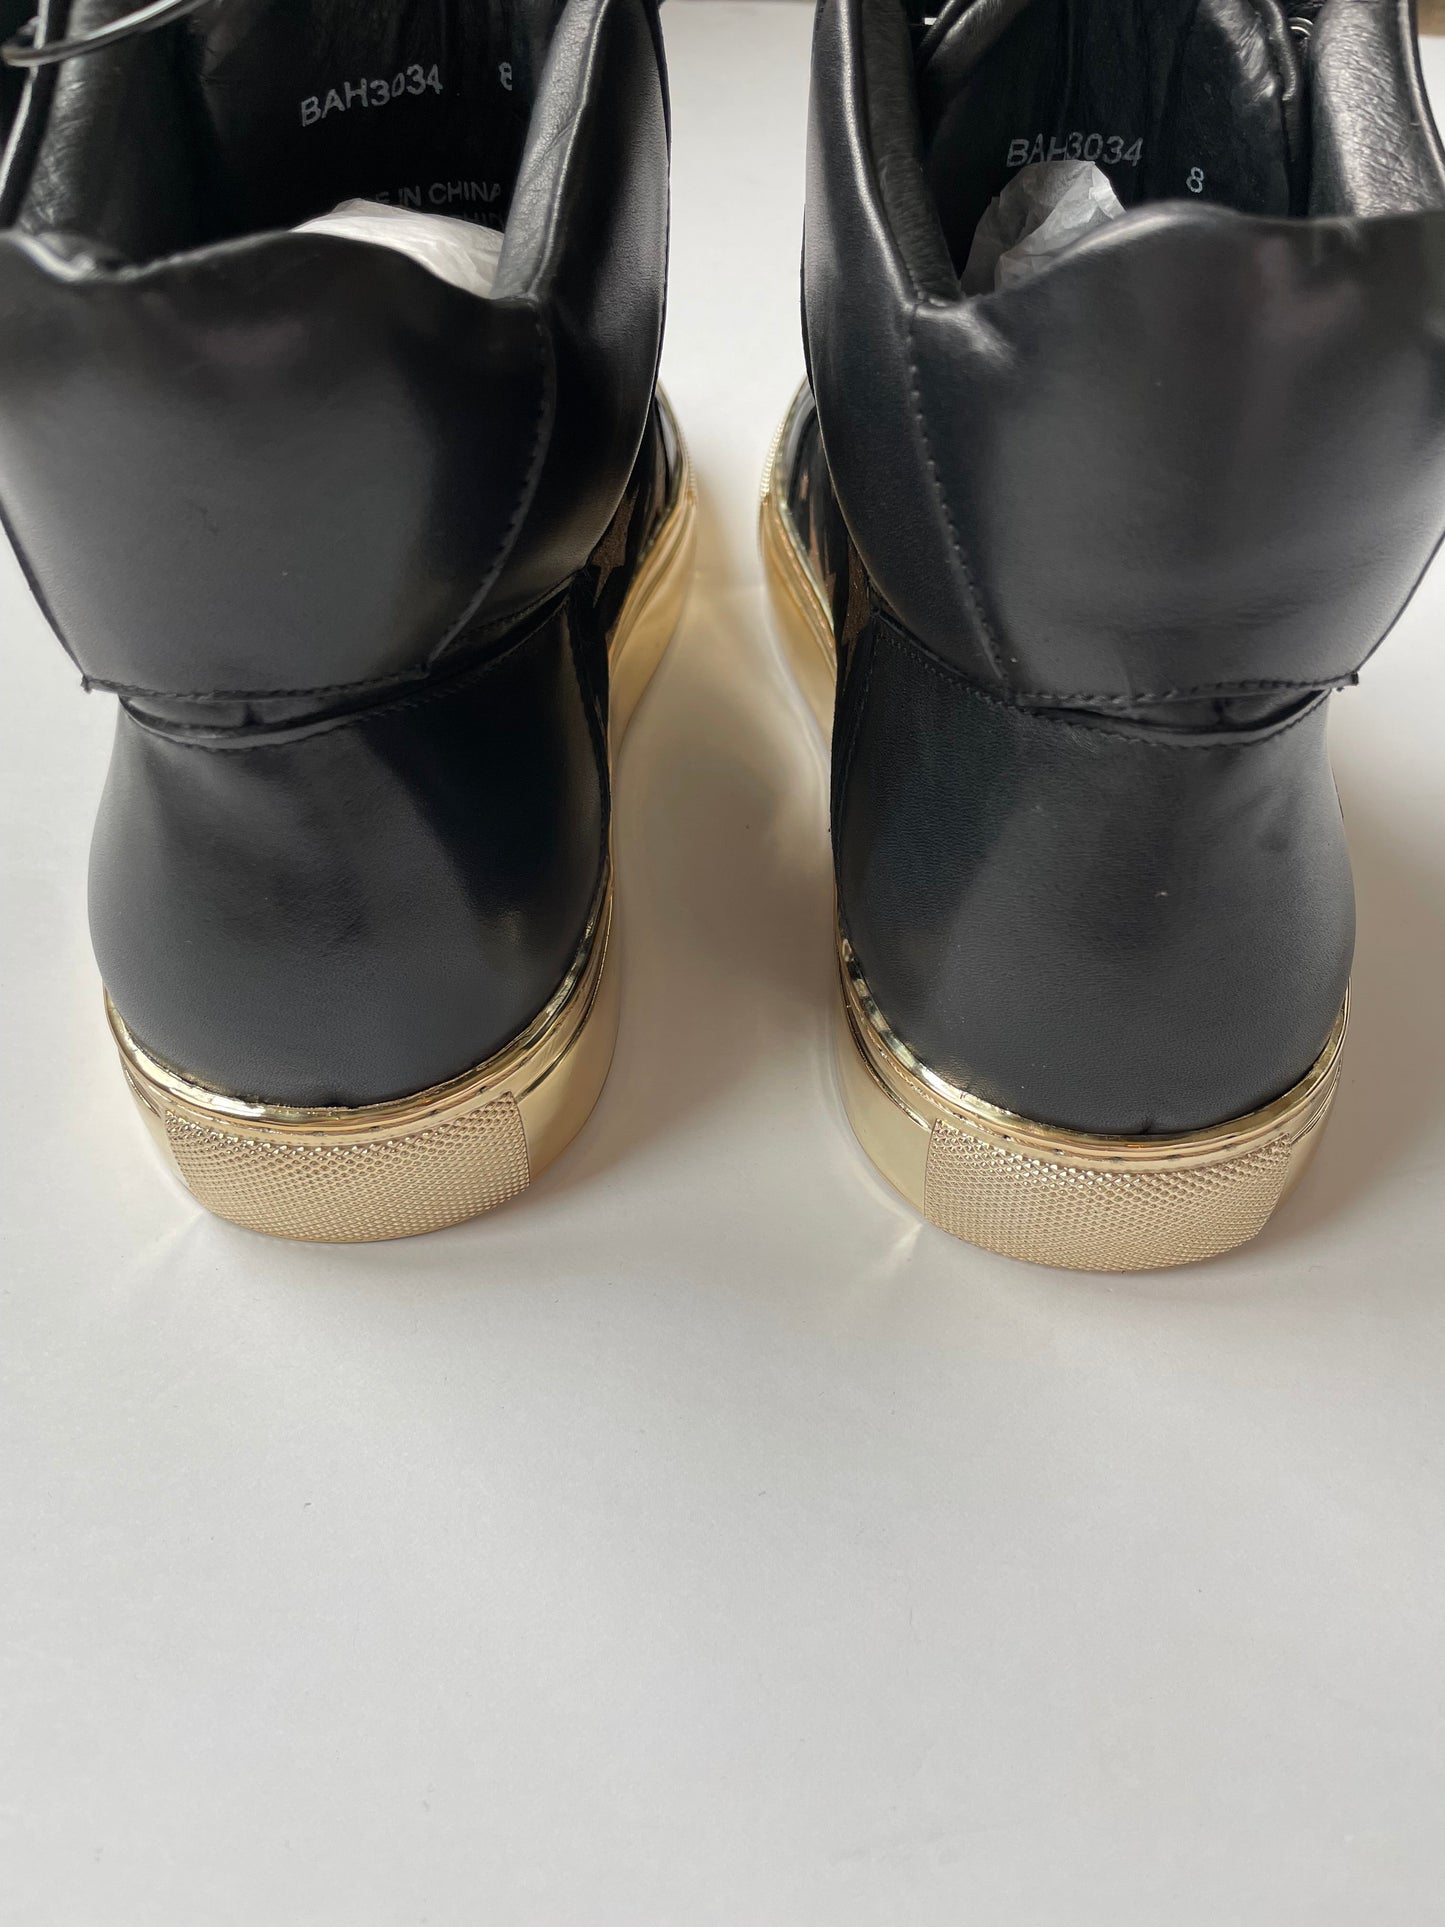 Shoes Sneakers By Badgley Mischka  Size: 8